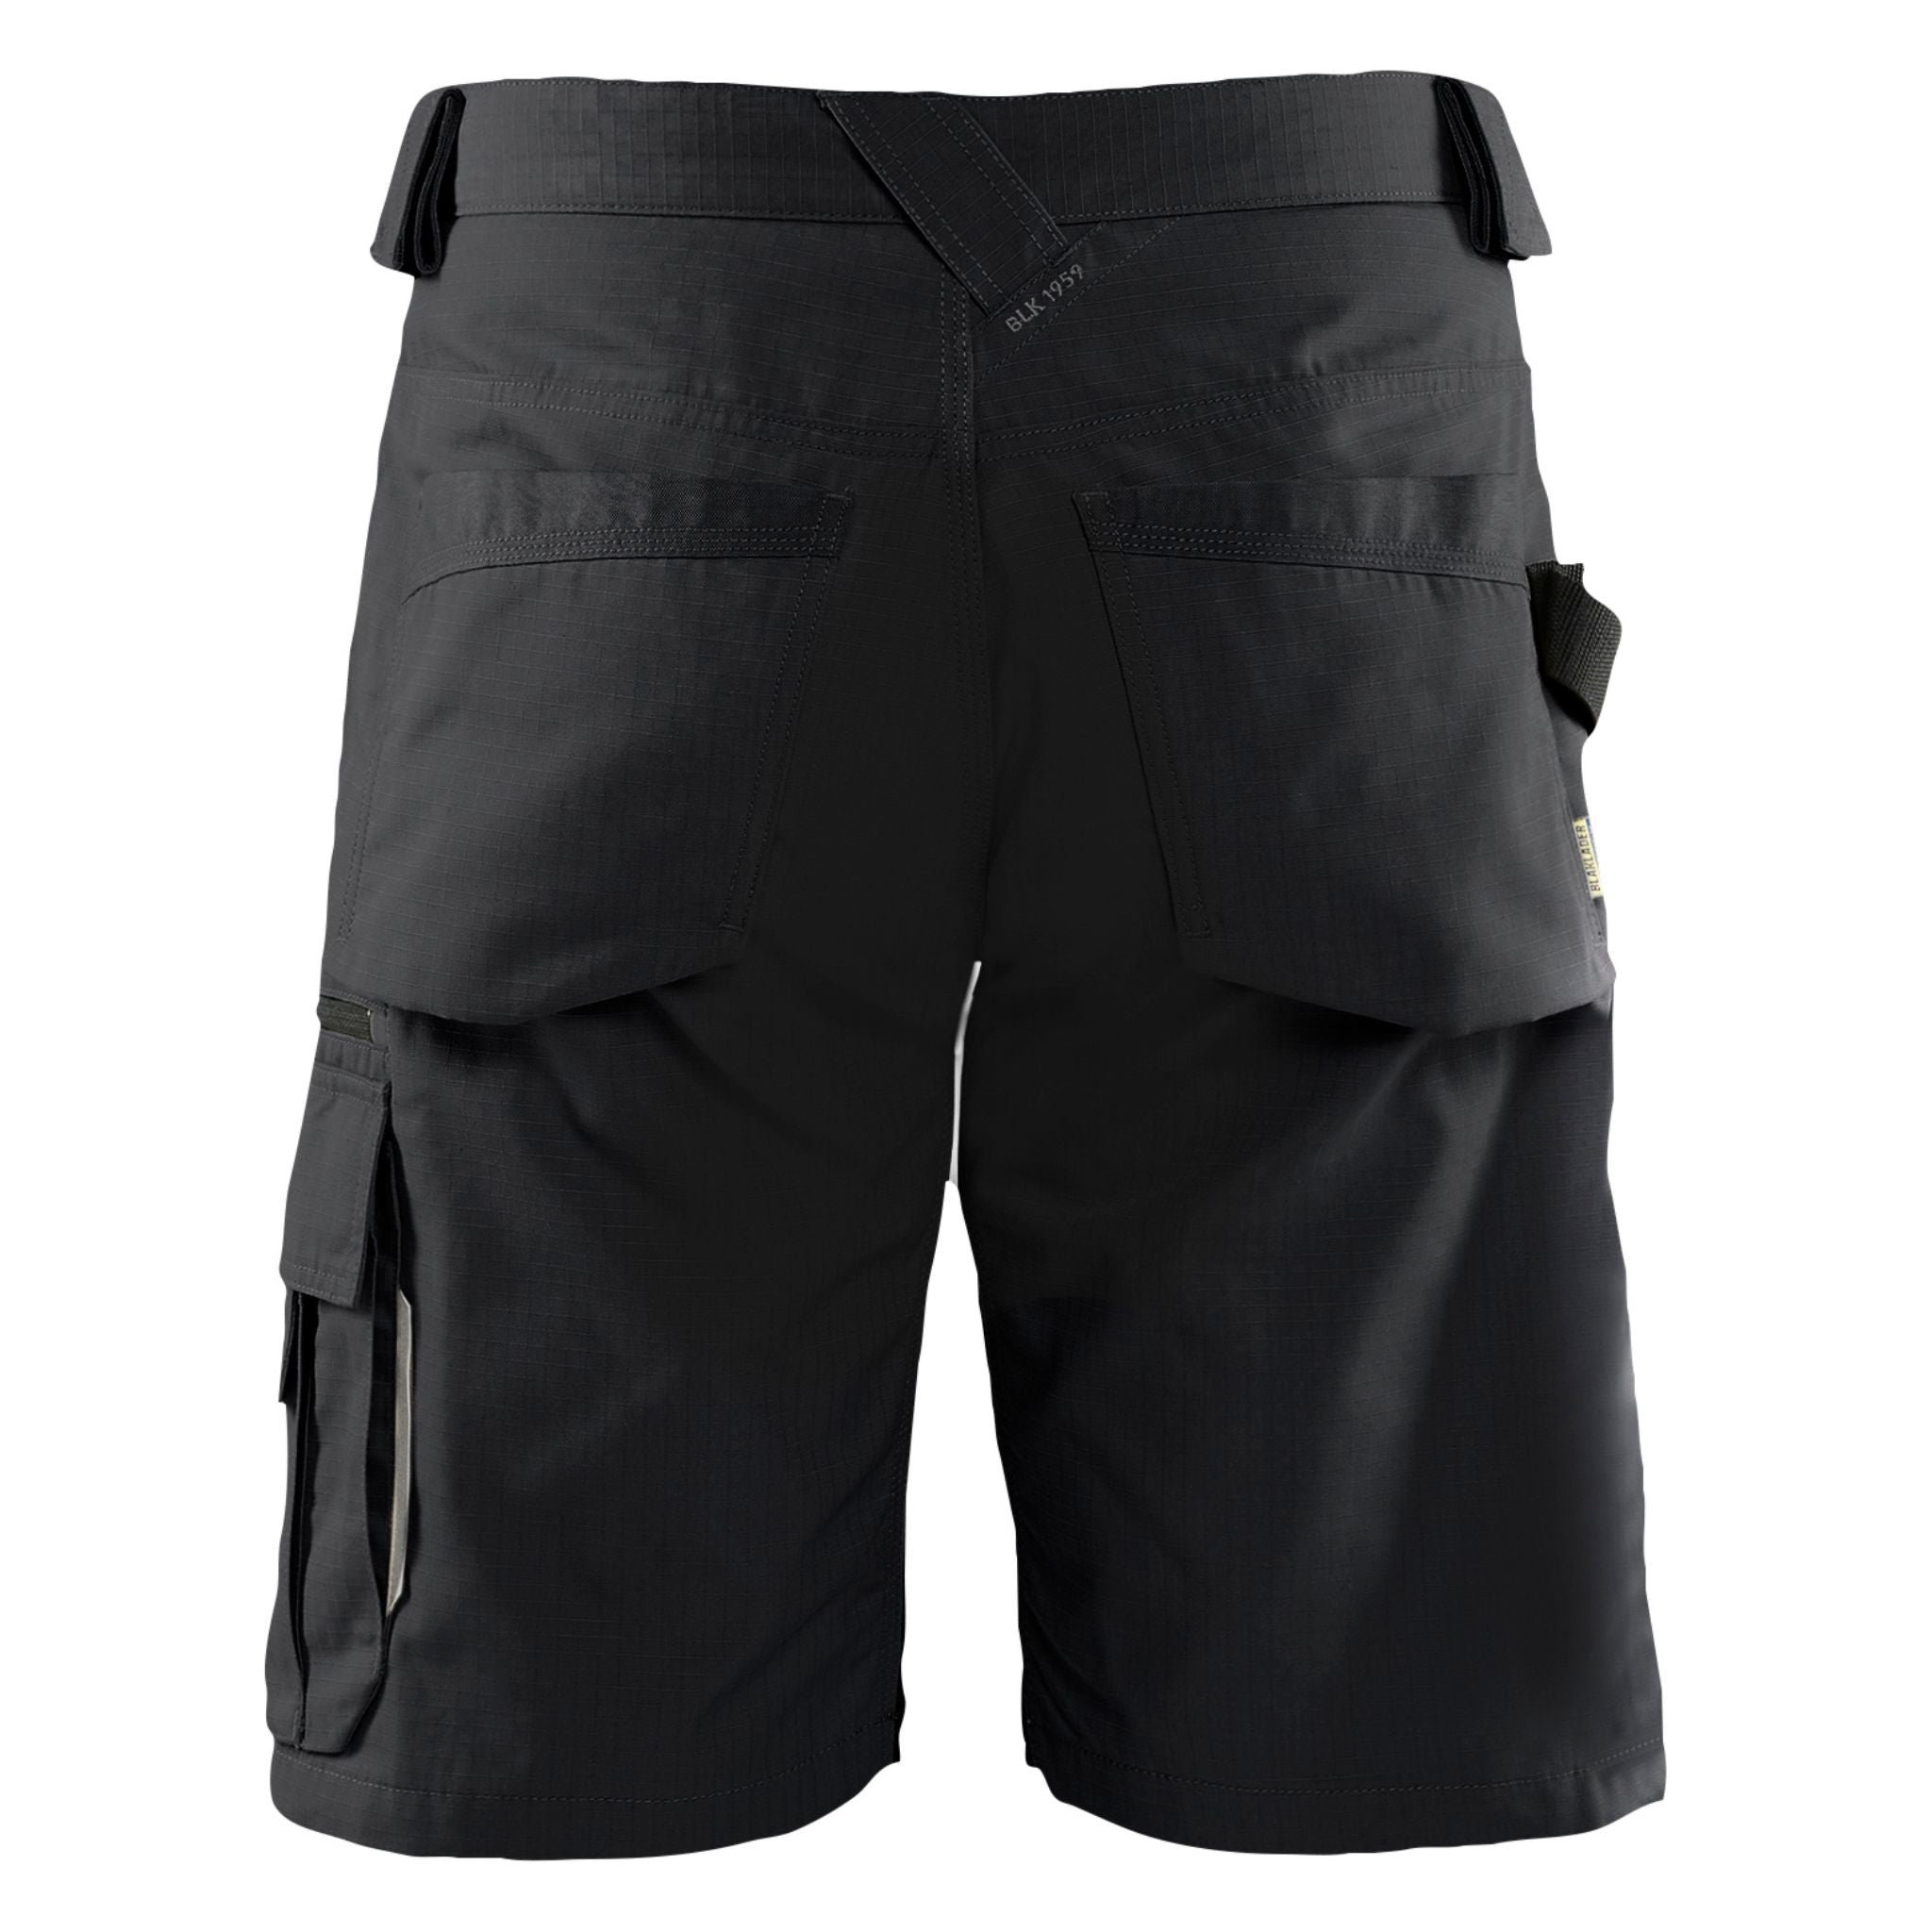 Women's black pocketed ripstop work shorts rear 